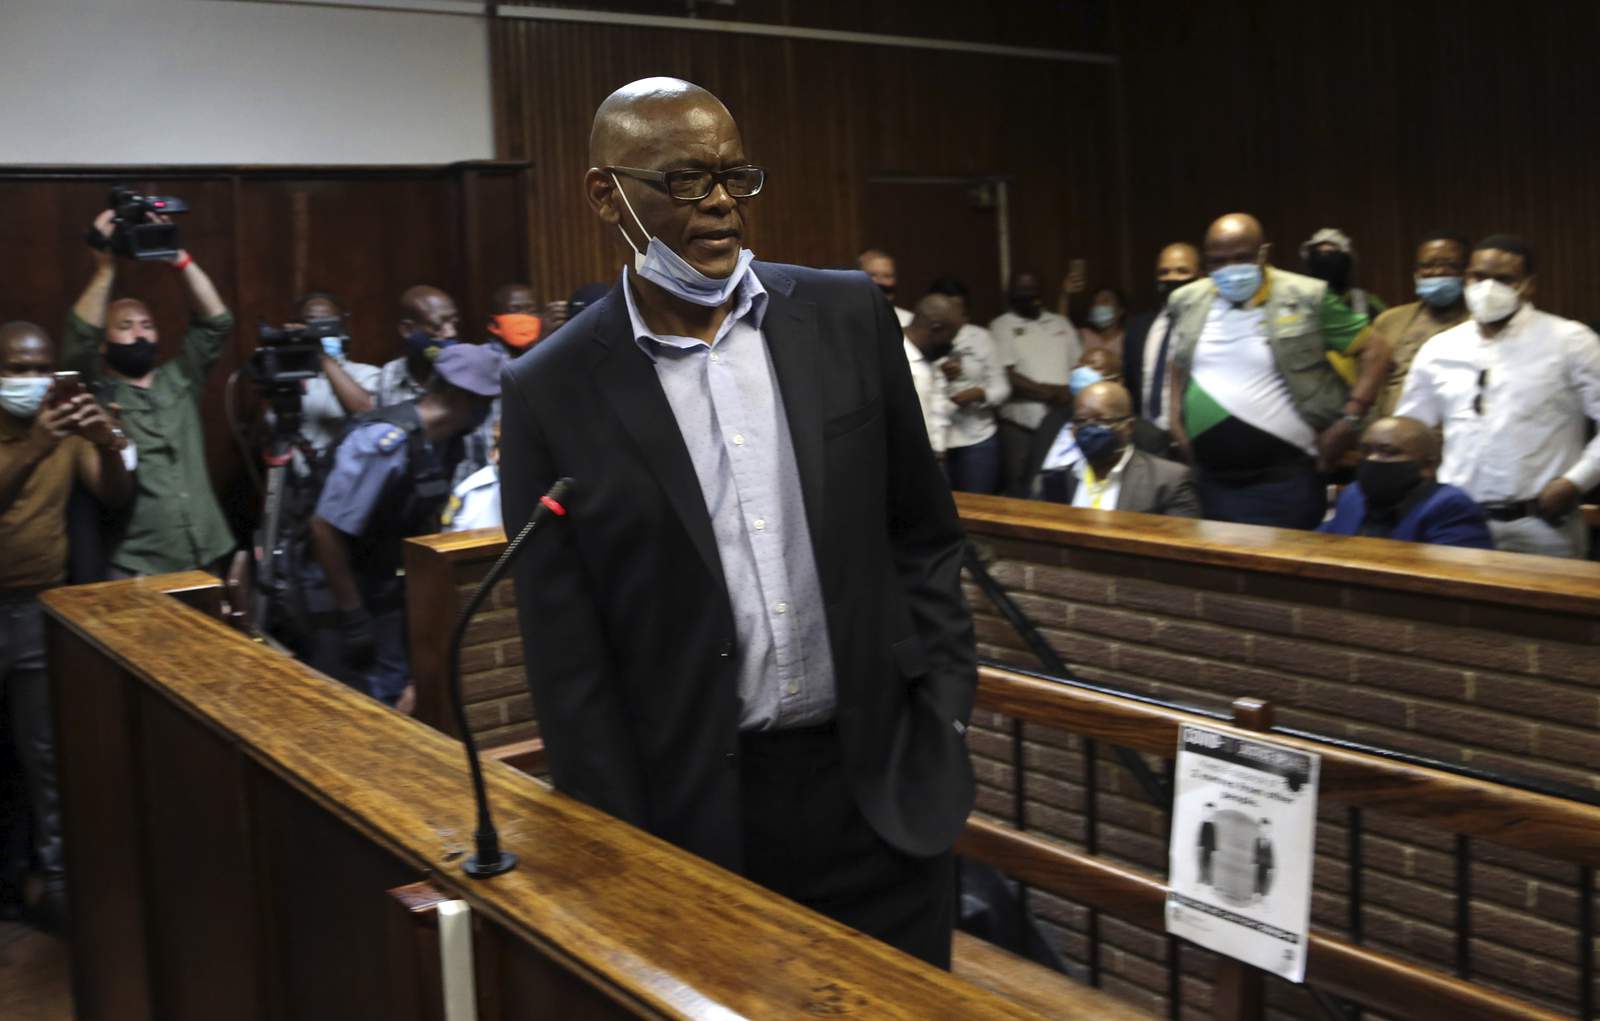 South African ruling party official charged with corruption